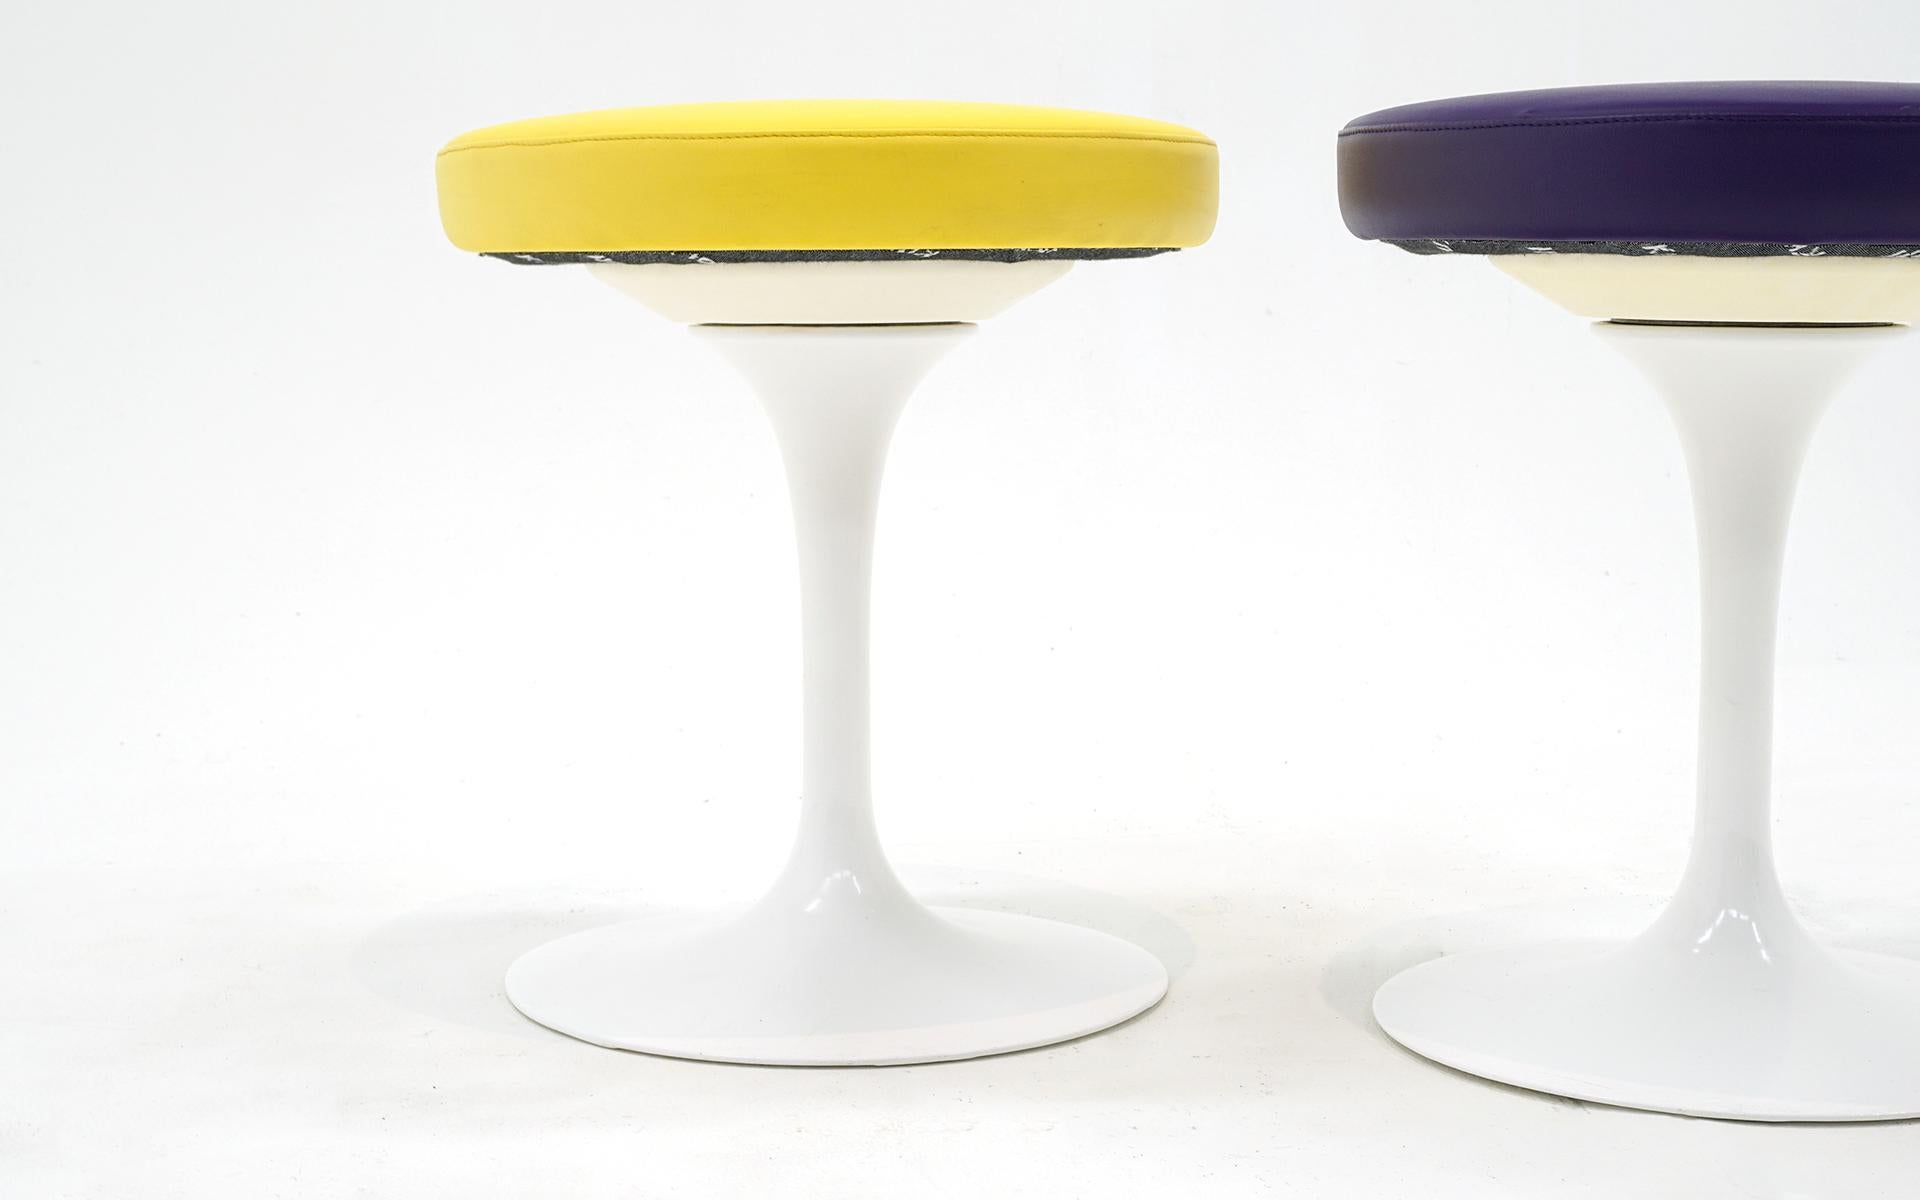 Aluminum Two Swivel Tulip Stools by Eero Saarinen for Knoll, Yellow and Purple, Signed For Sale